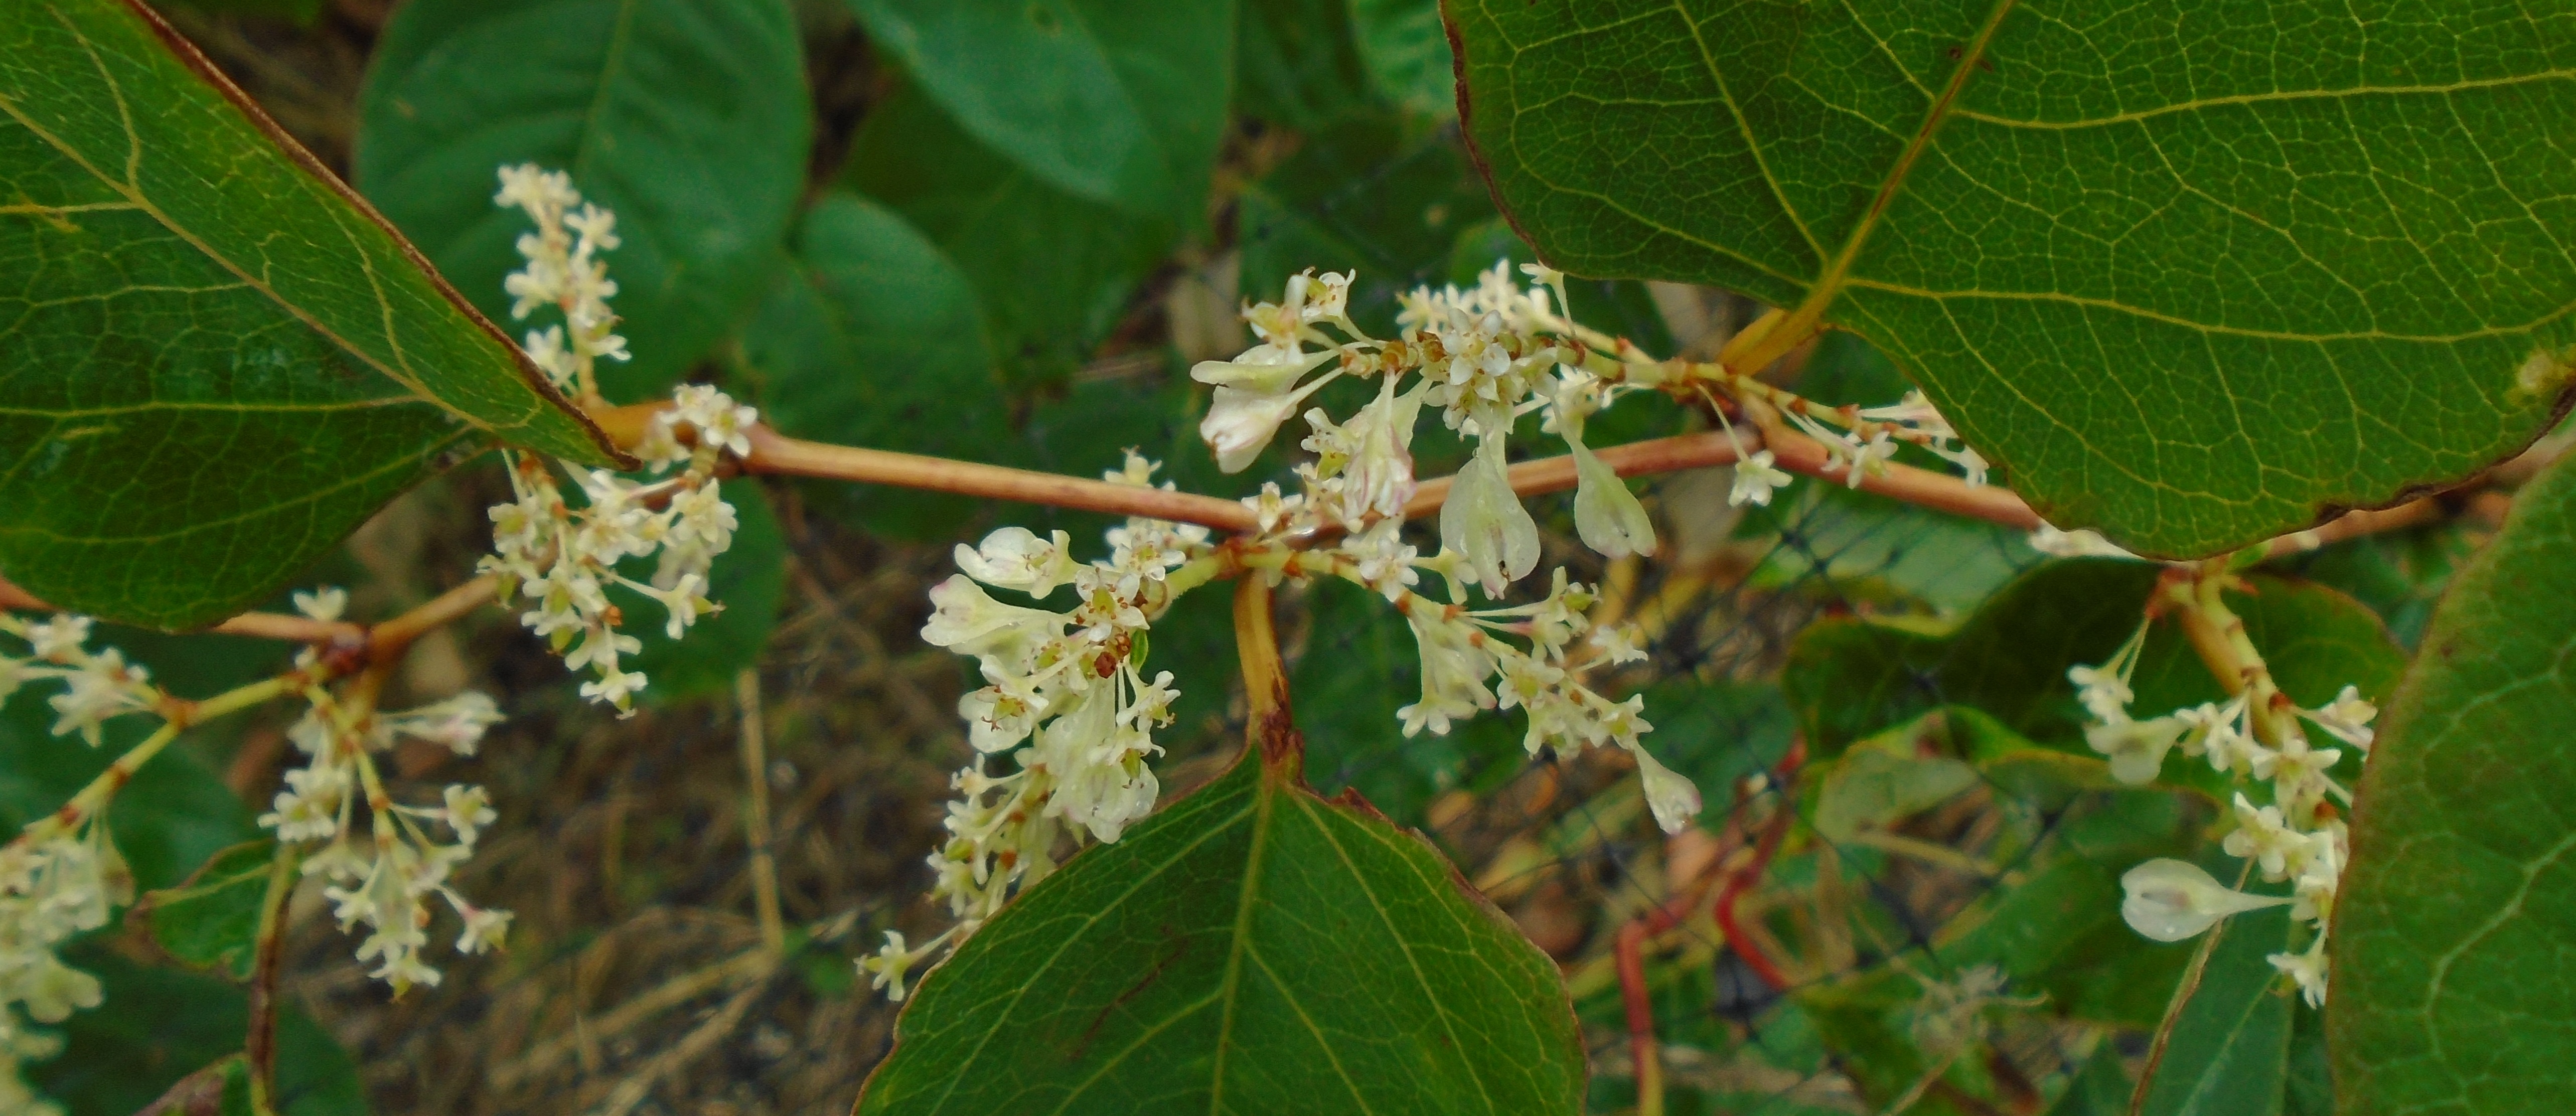 Knotweed fruits and flowers